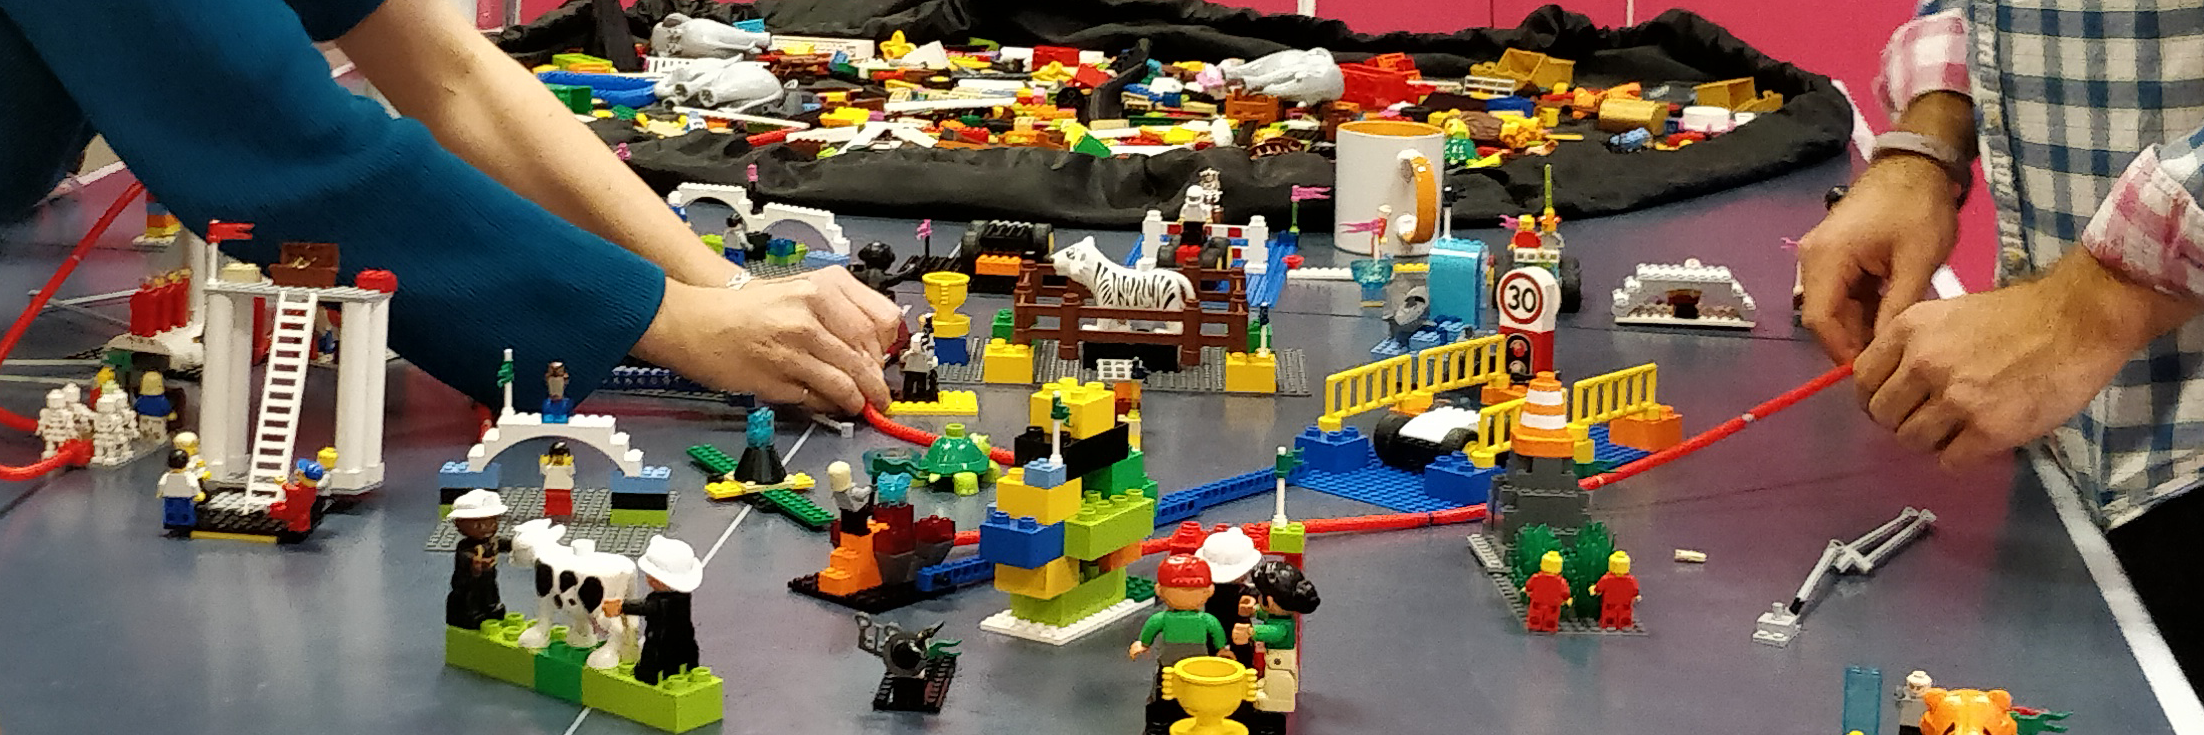 Lego Serious Play workshop in action